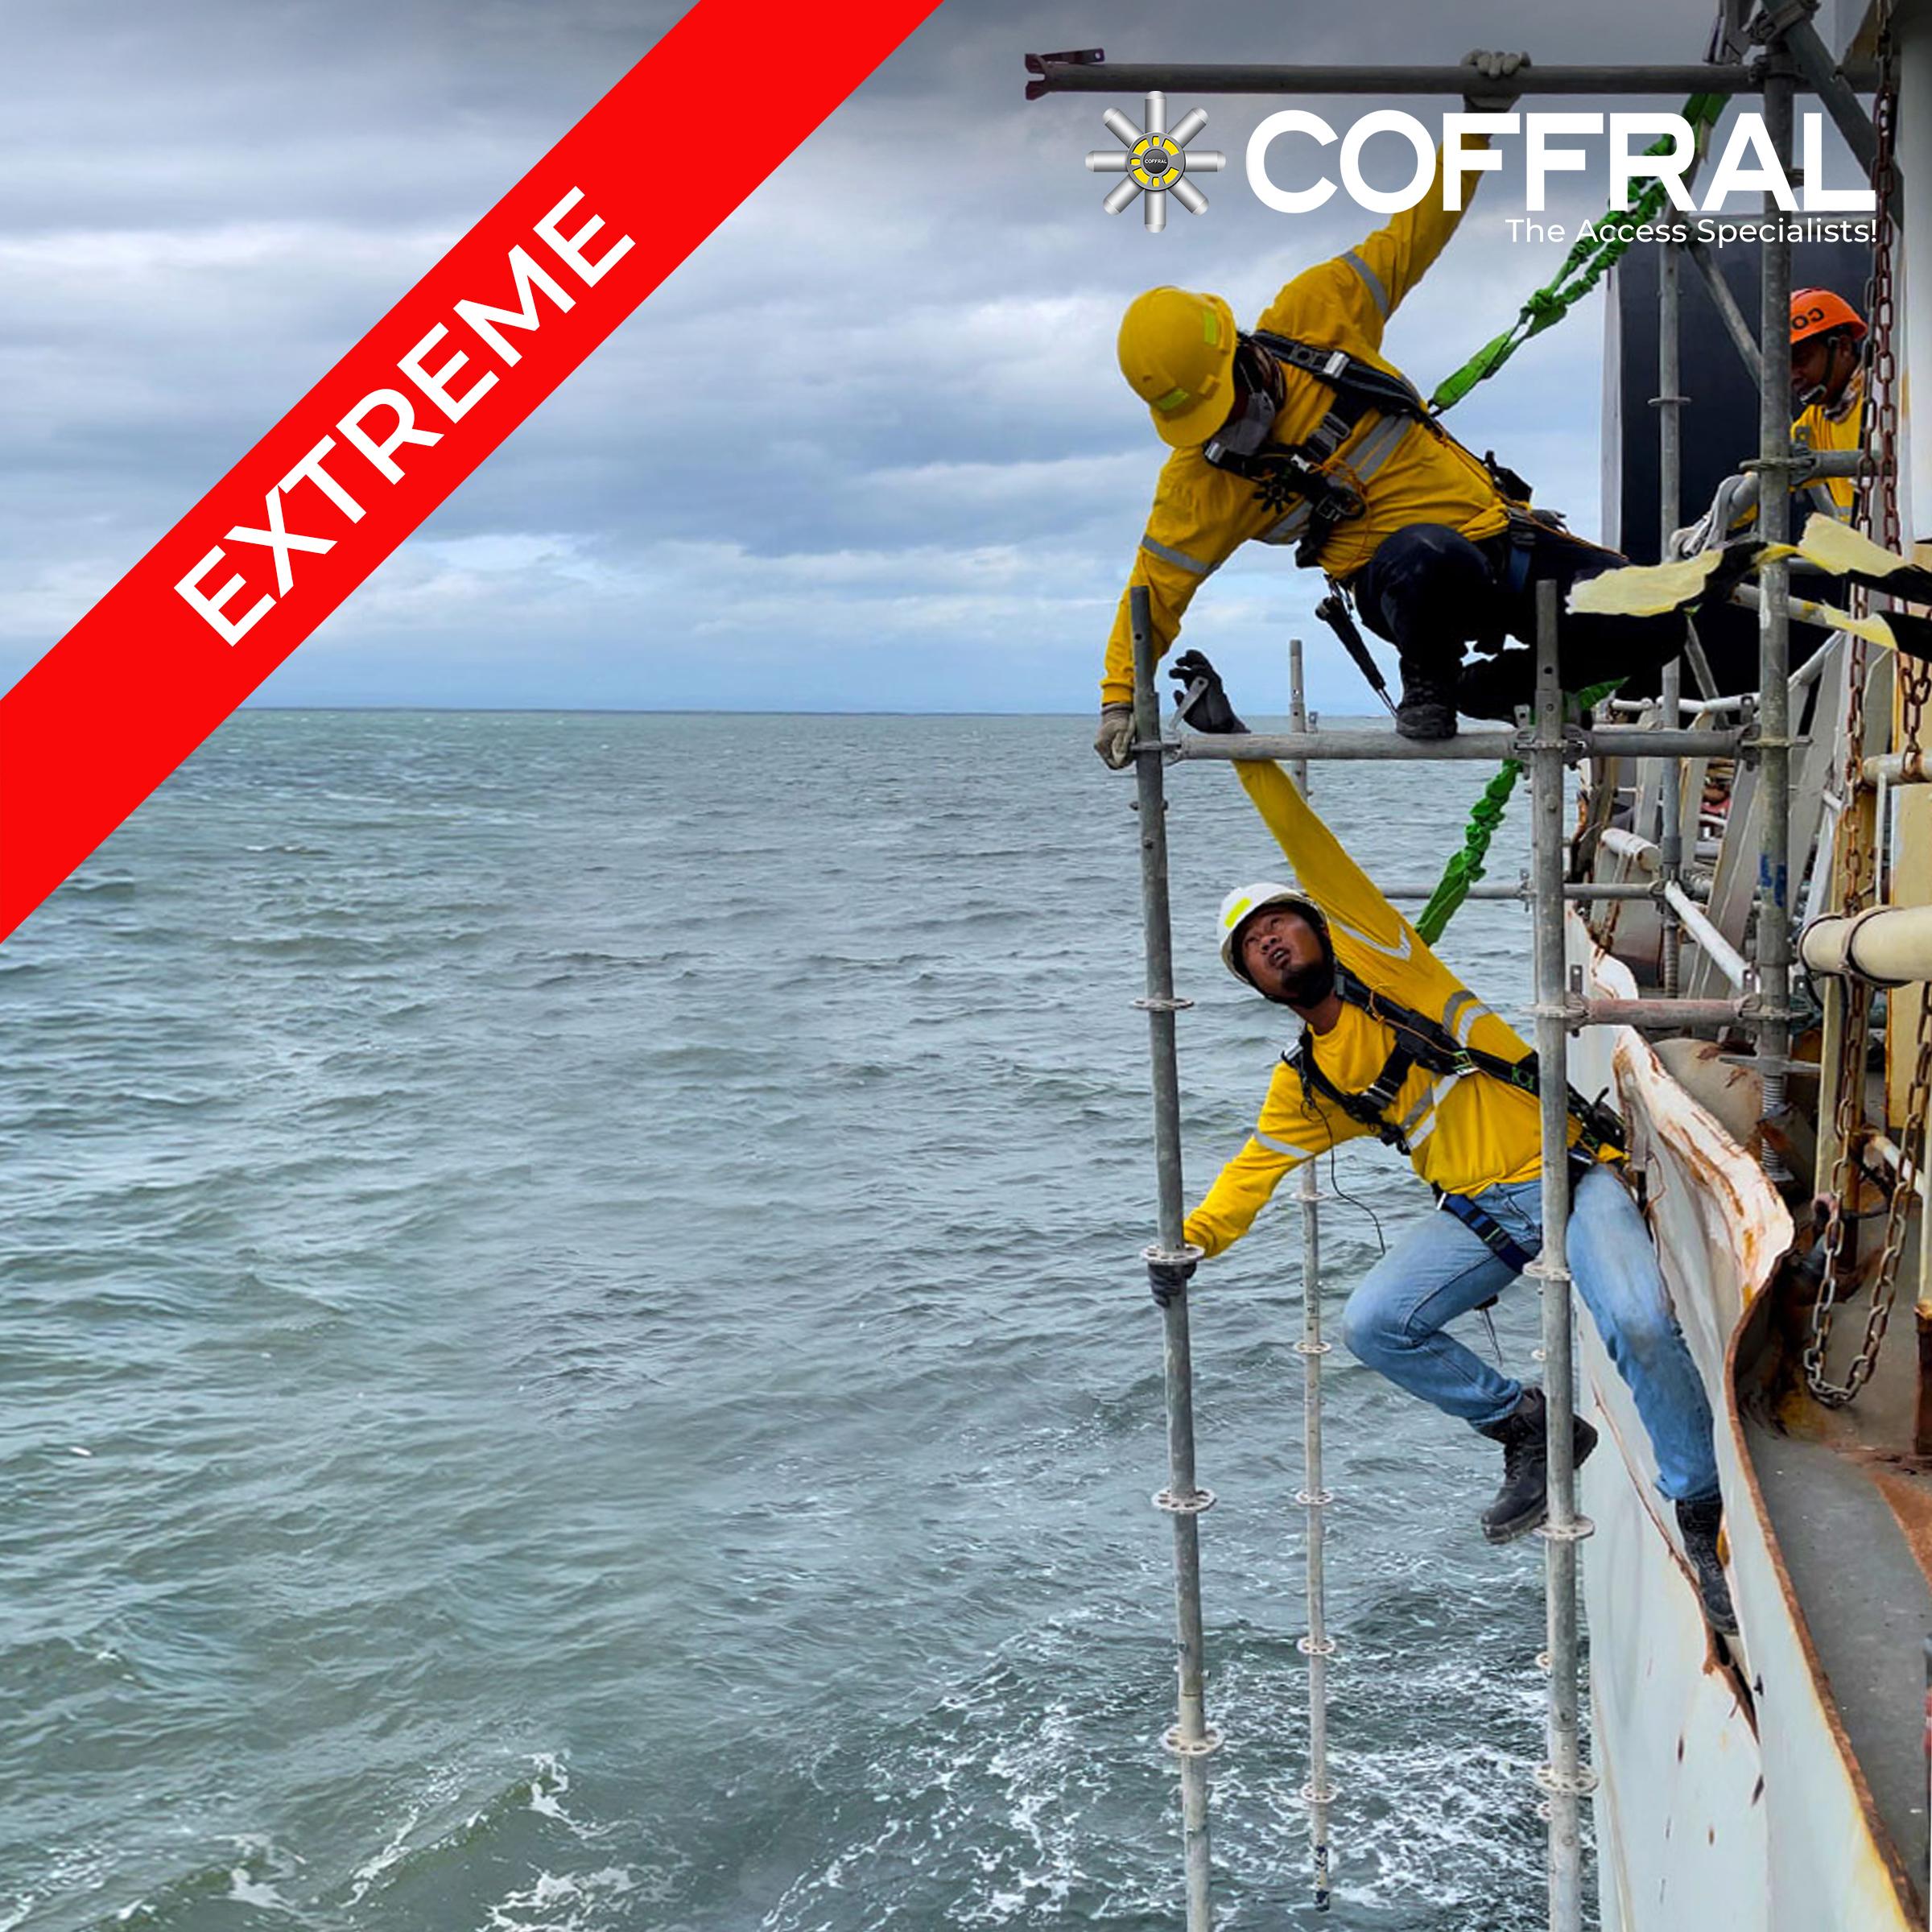 industrial Ringlock scaffolding. Offshore Vessel Repairs. Coffral-Manpower. Extreme hanging scaffolding offshore.